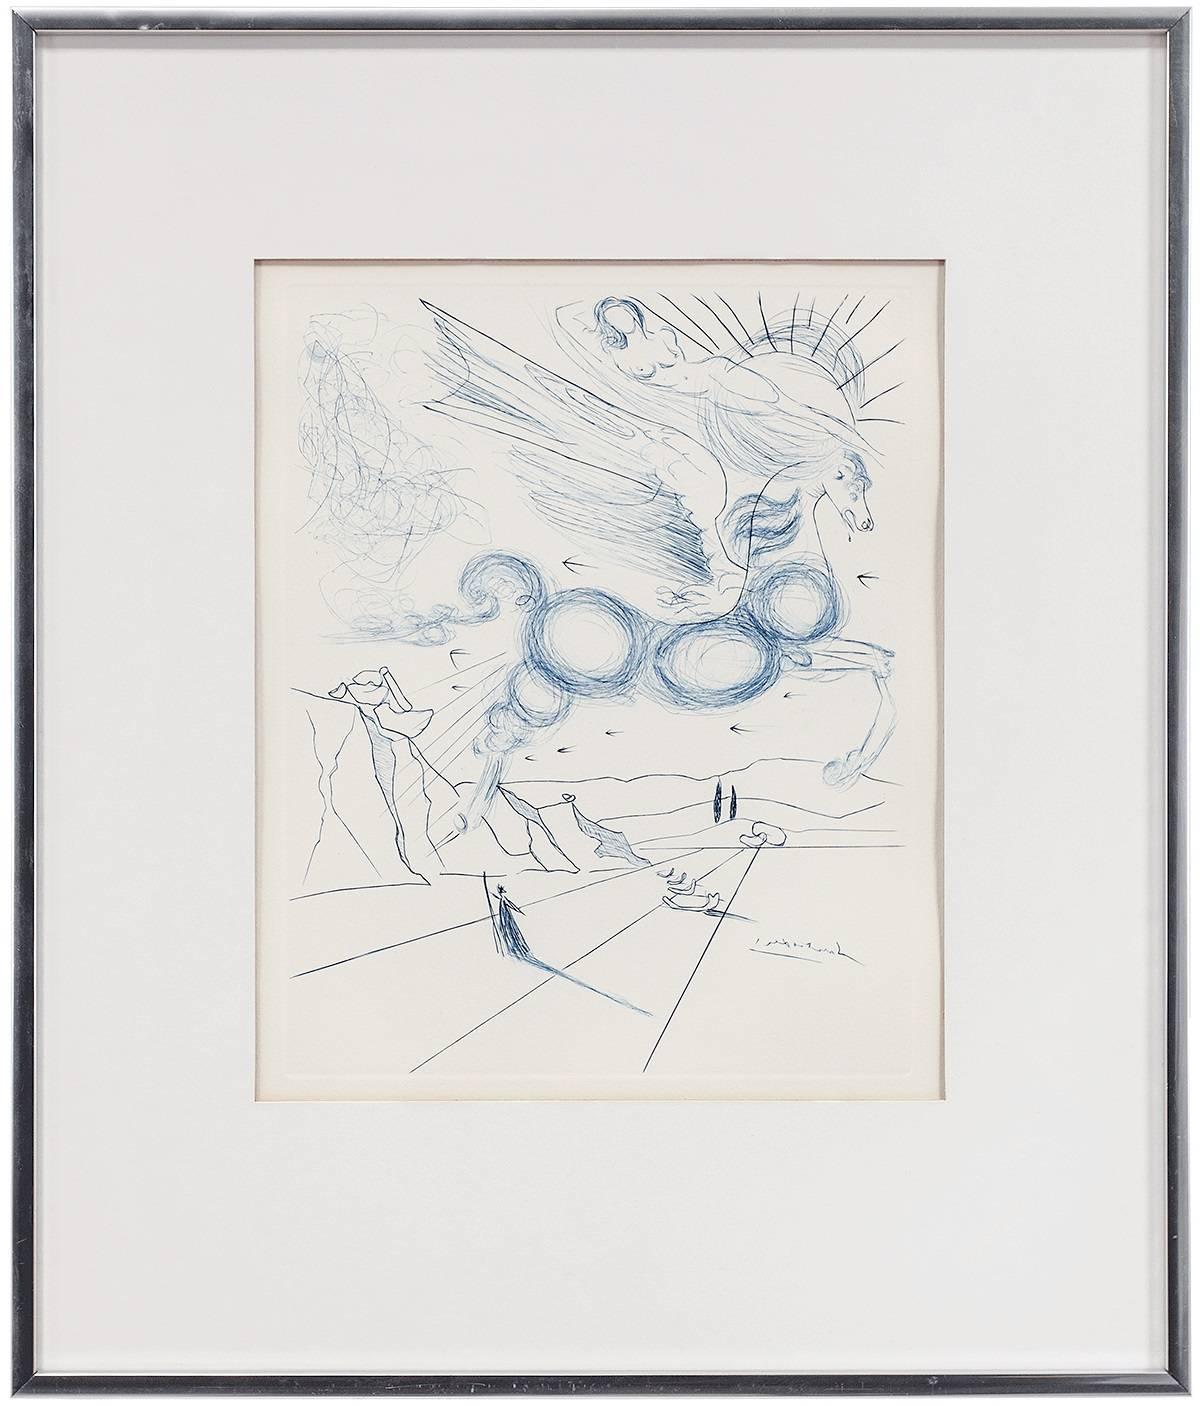 PEGASUS IN FLIGHT WITH ANGEL, Etching - Print by Salvador Dalí